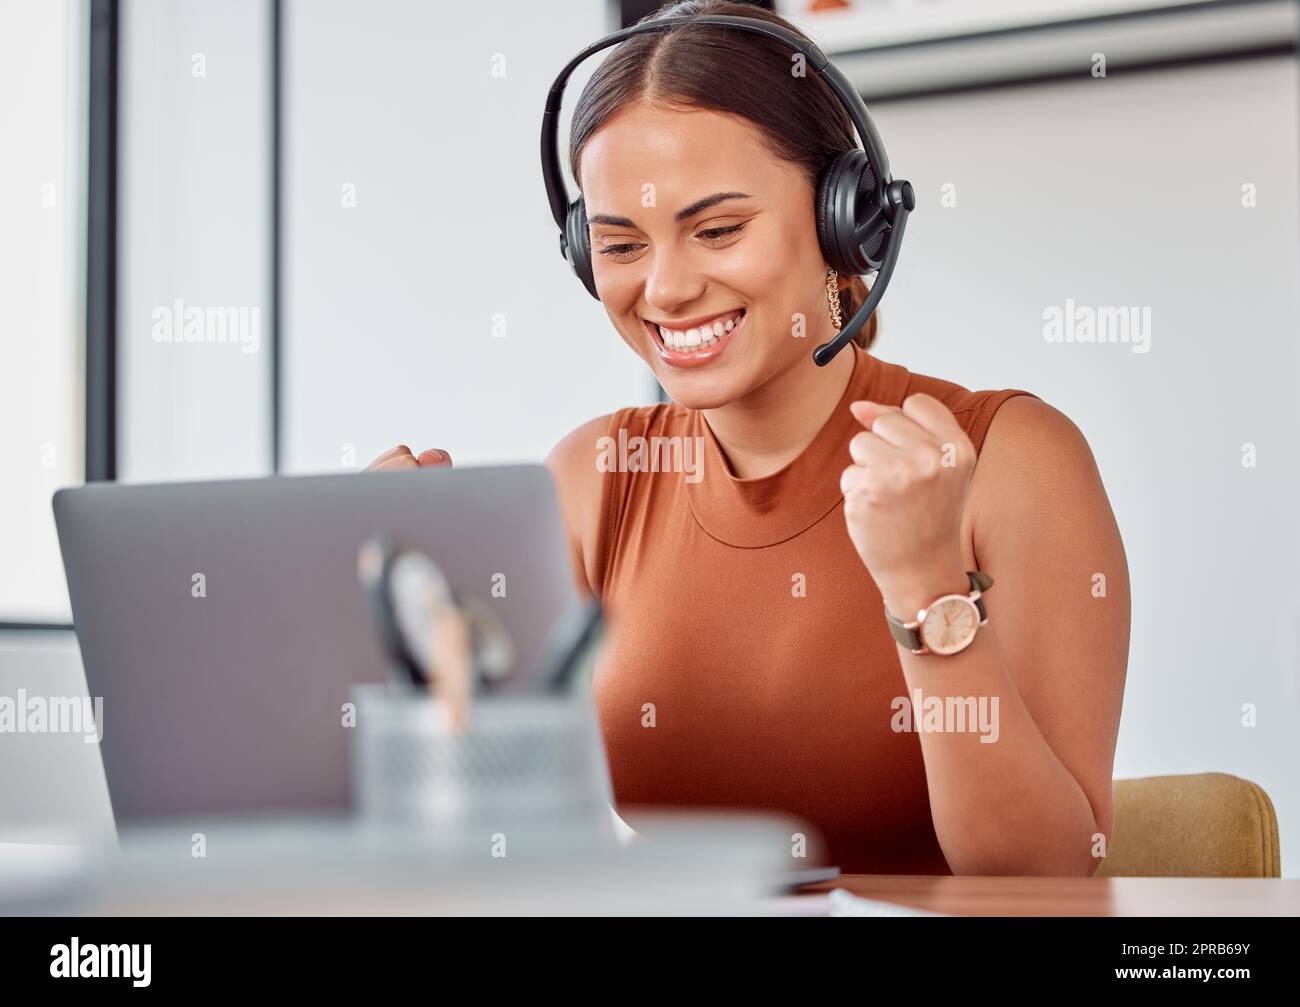 Yes Another happy customer. an attractive young female call center agent cheering while working on her laptop. Stock Photo